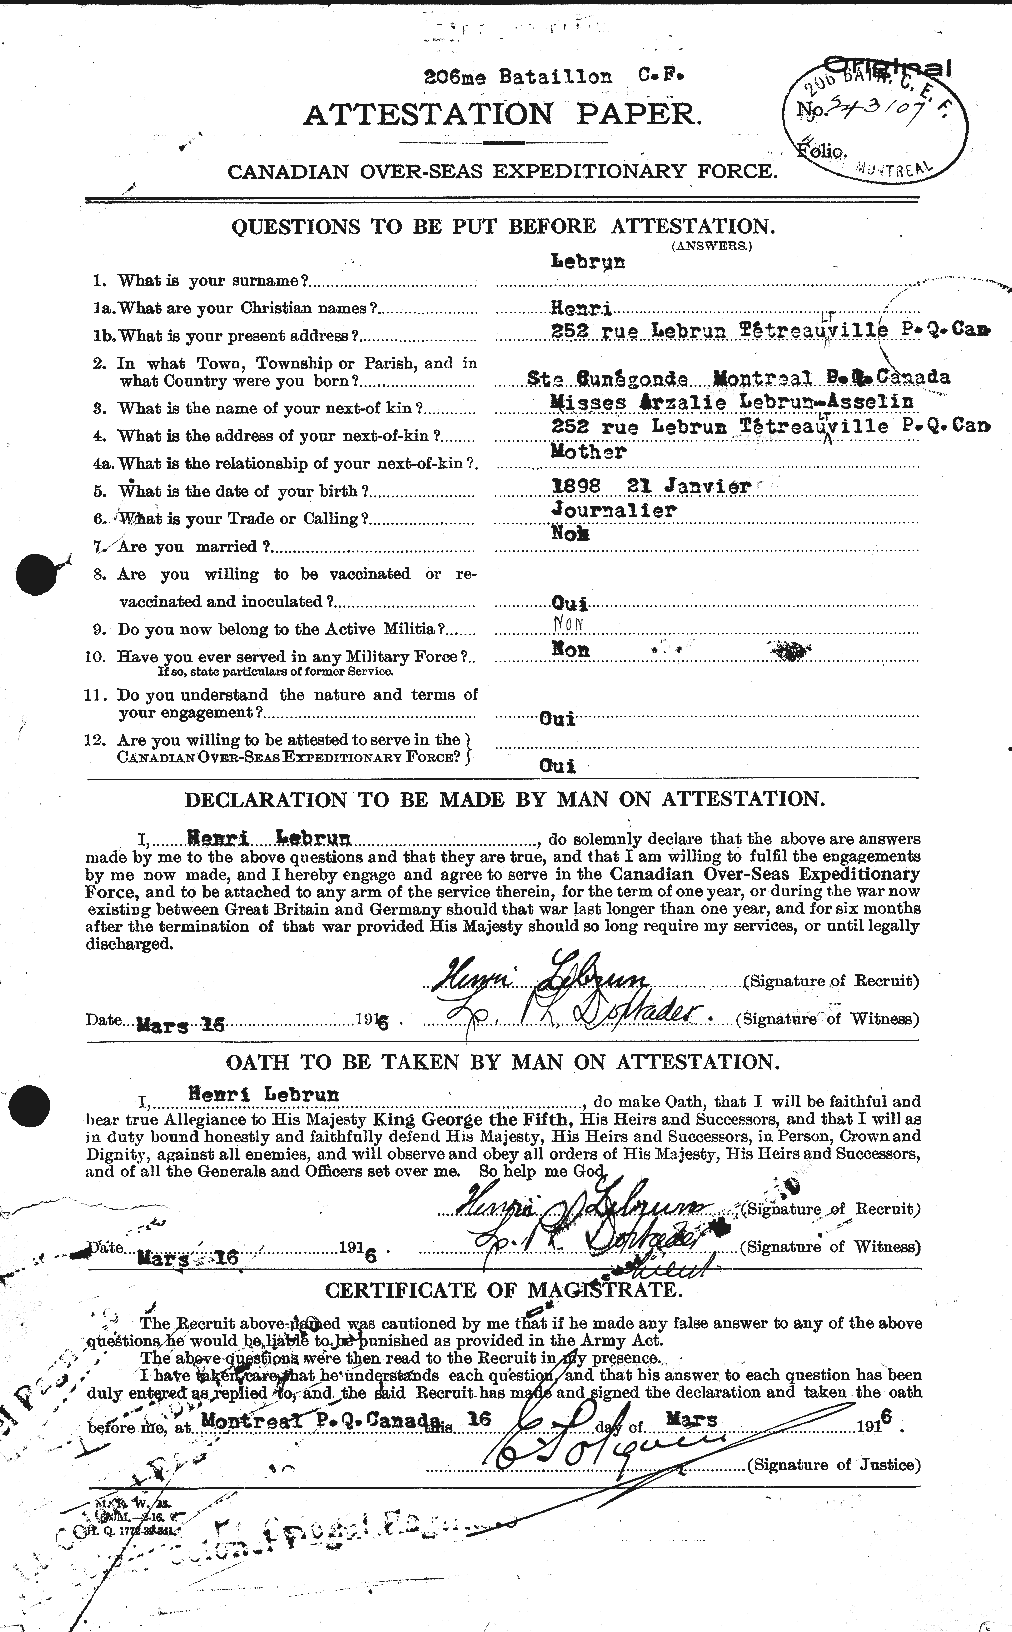 Personnel Records of the First World War - CEF 461568a